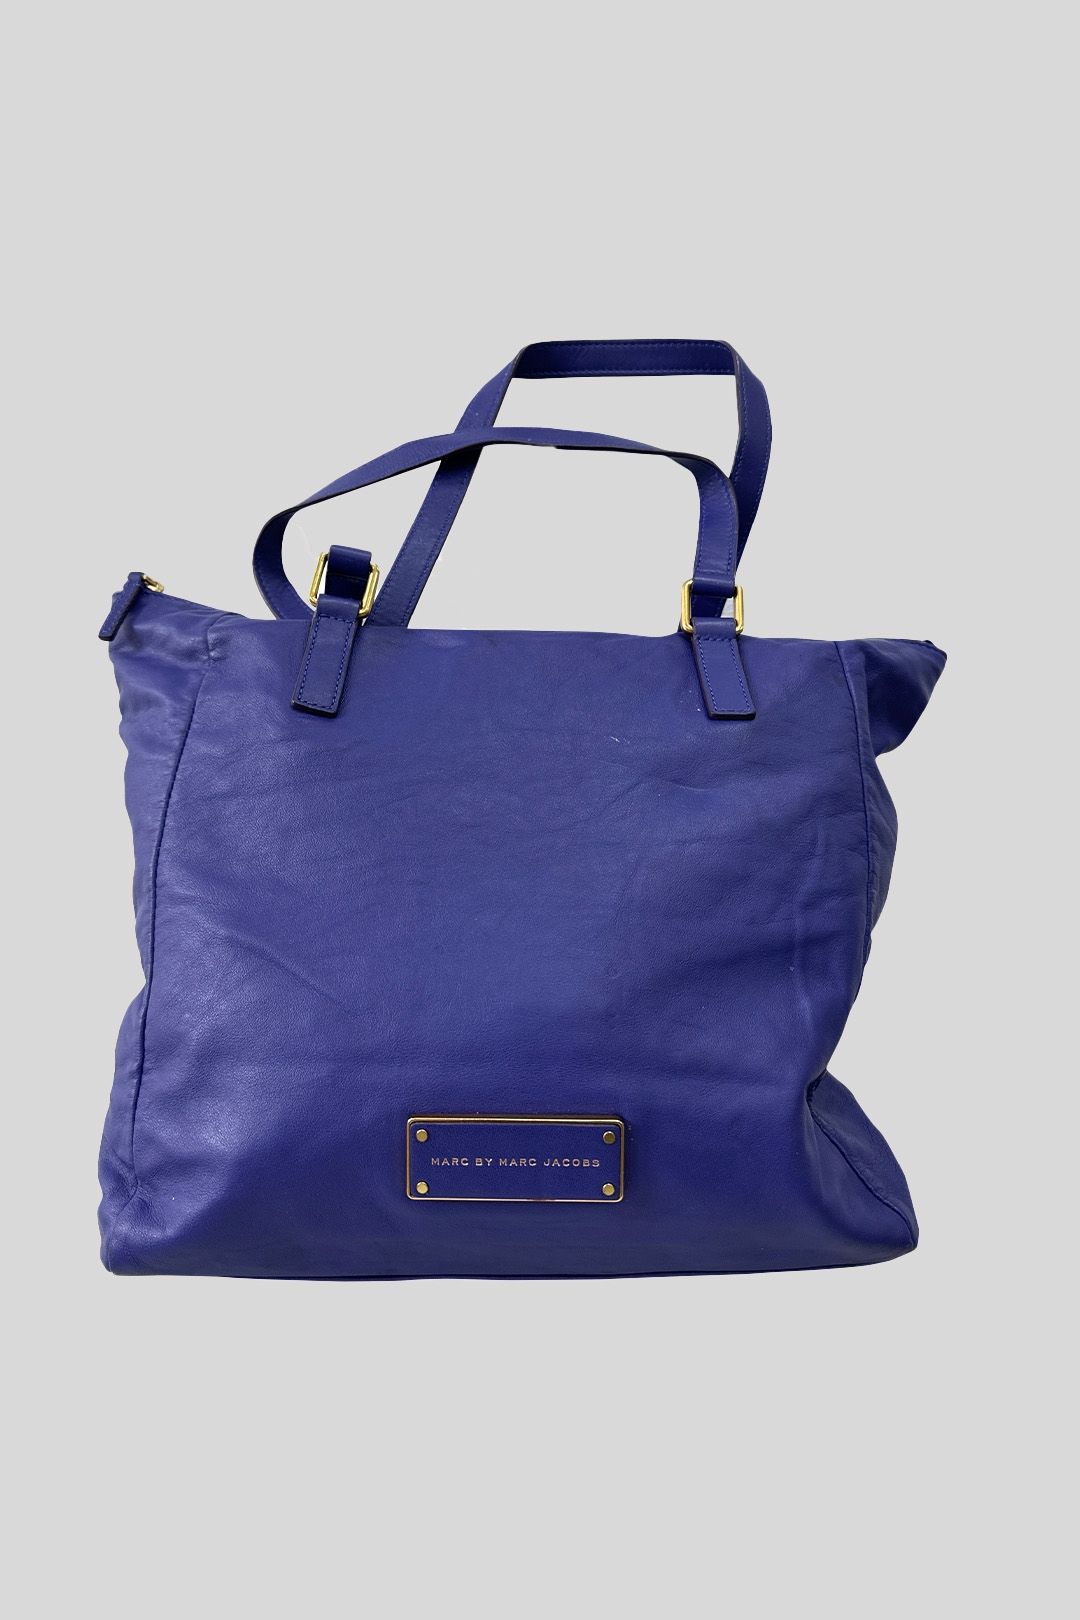 Marc by Marc Jacobs  - Blue Leather Tote Bag